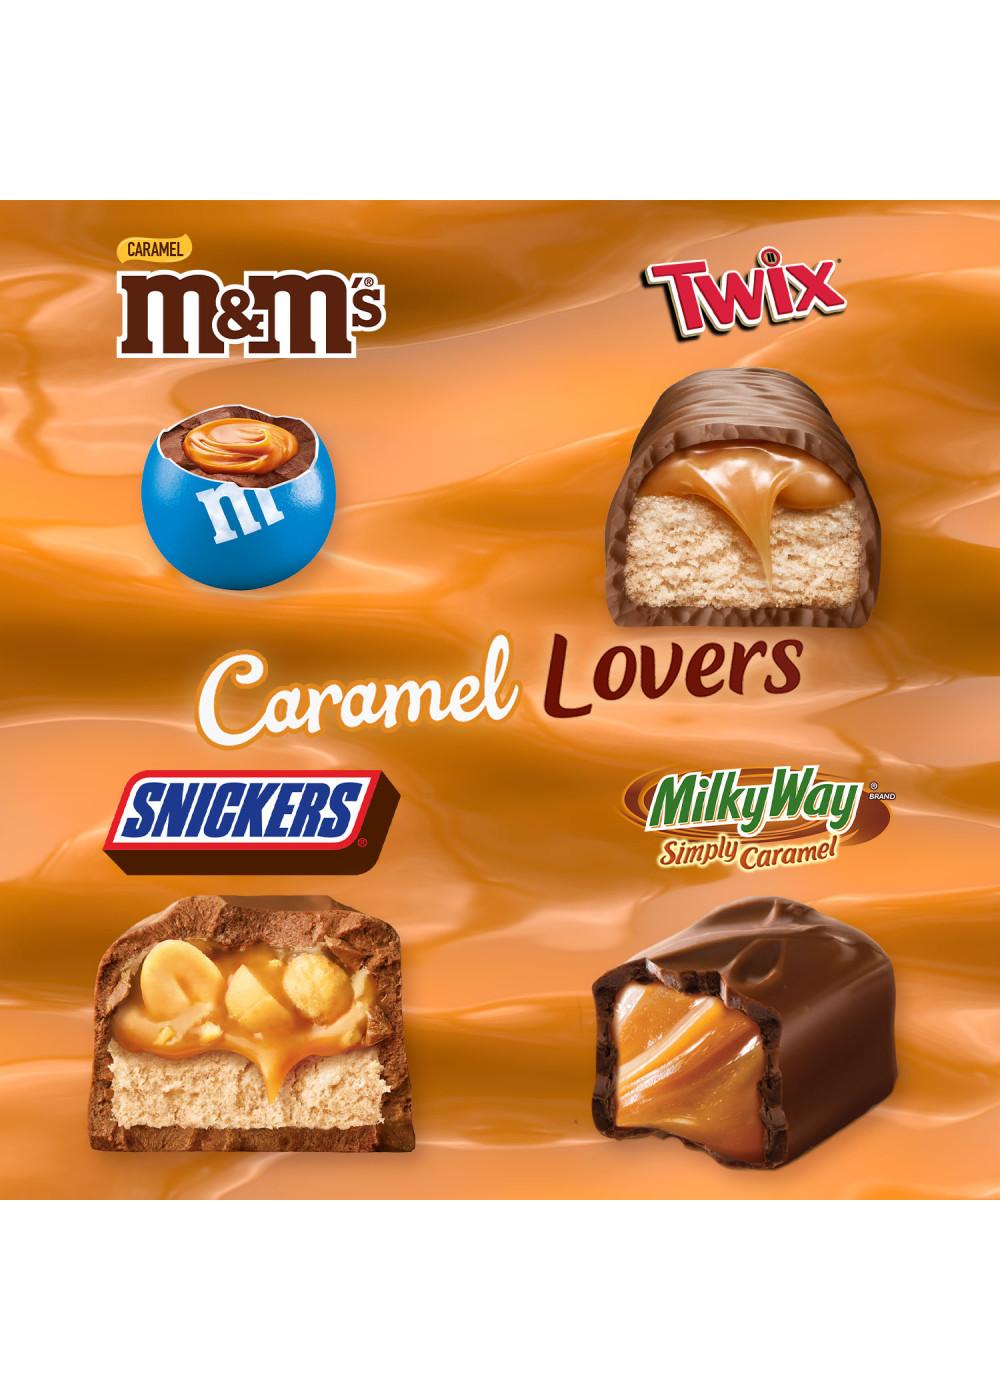 Mars Wrigley Assorted Full Size Chocolate Candy Bars - Variety Pack - Shop  Candy at H-E-B